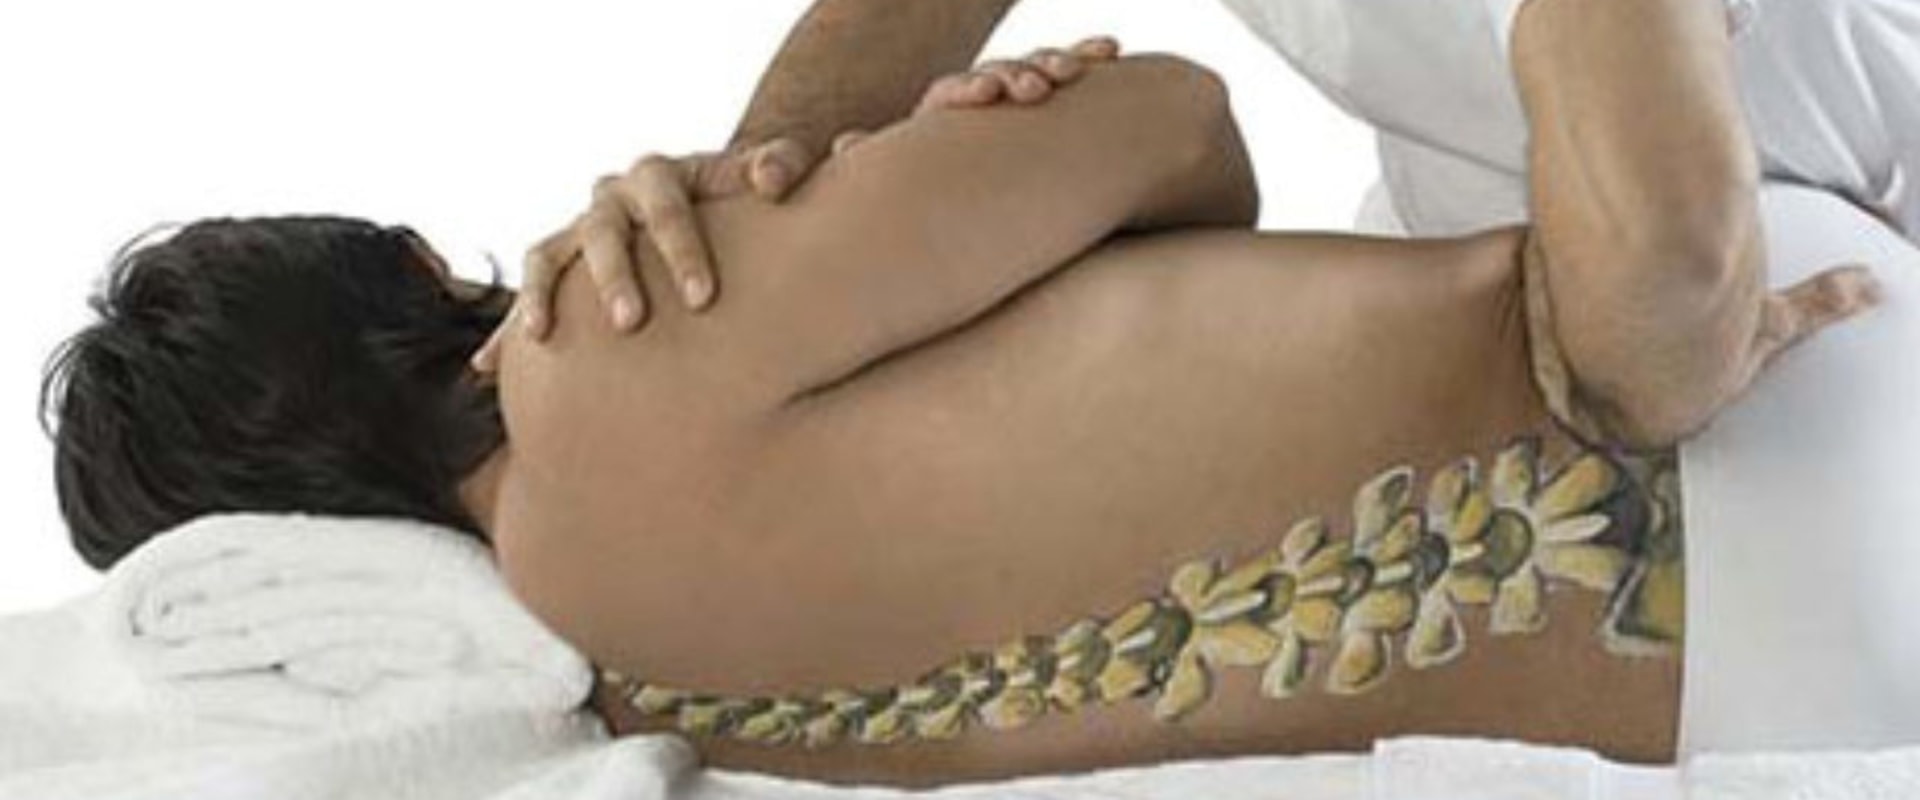 What Conditions Can Australian Chiropractors Treat with Spinal Manipulation?